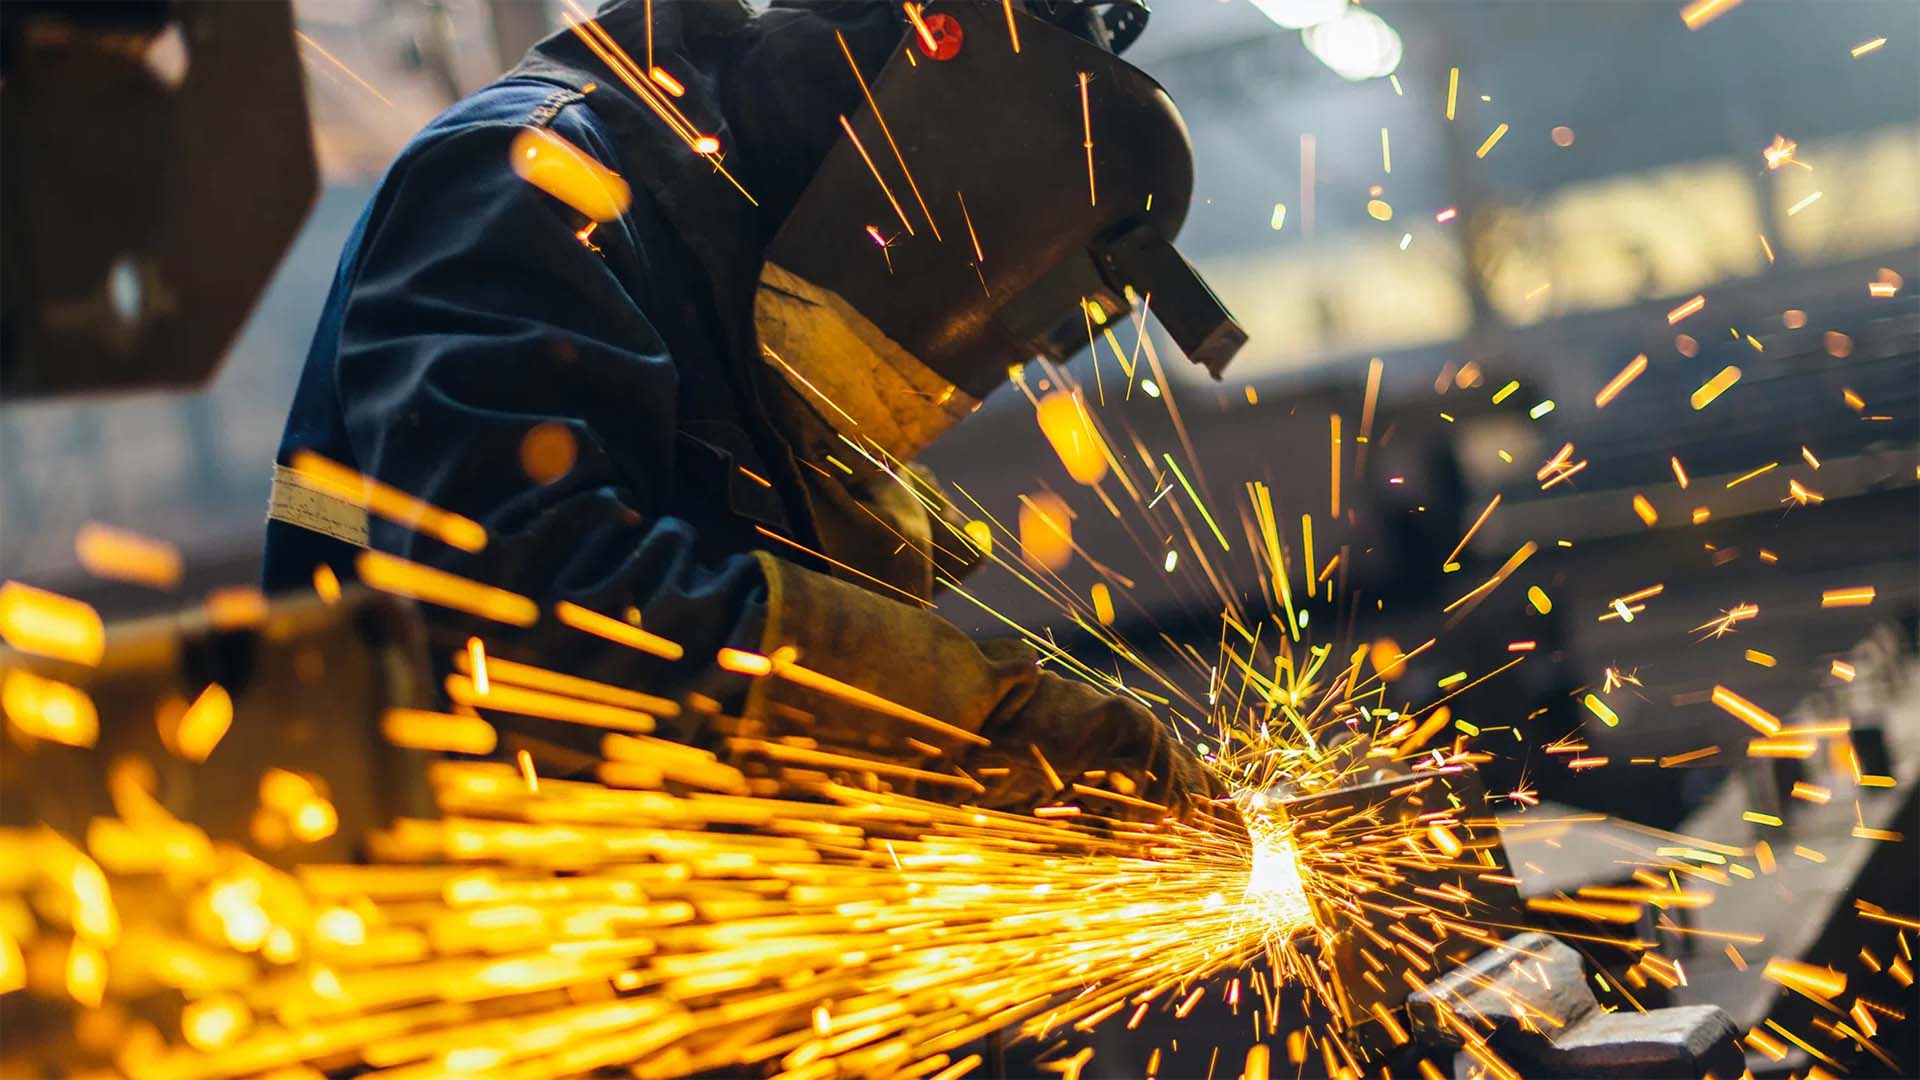 A worker grinding metal in a steel fabrication manufacturing plant